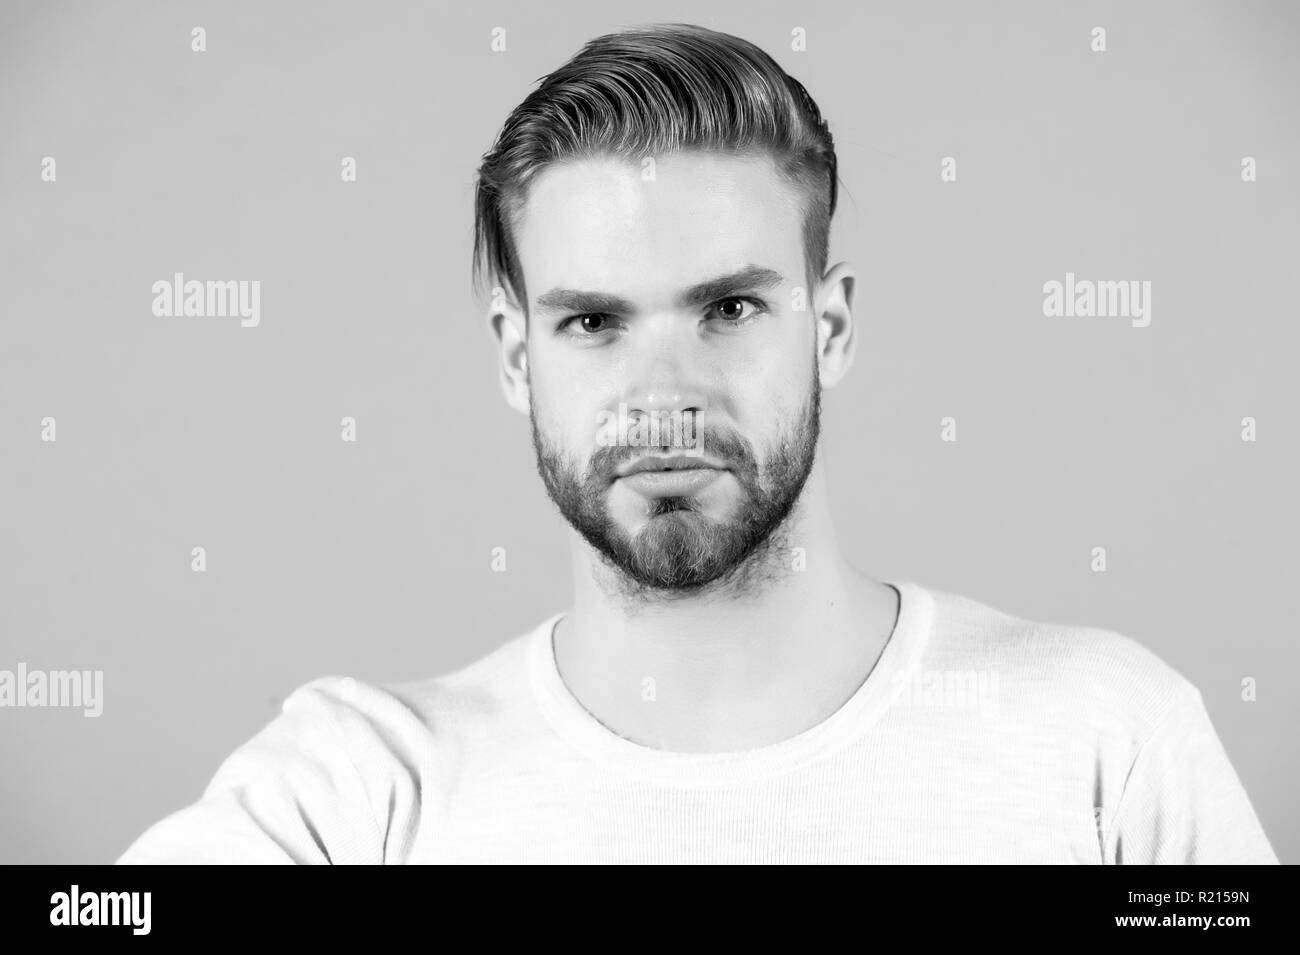 Macho in tshirt on grey background, fashion. Man with bearded face, stylish hair  haircut, salon. Fashion style, trend. Barber salon, barbershop. Grooming,  male beauty concept Stock Photo - Alamy